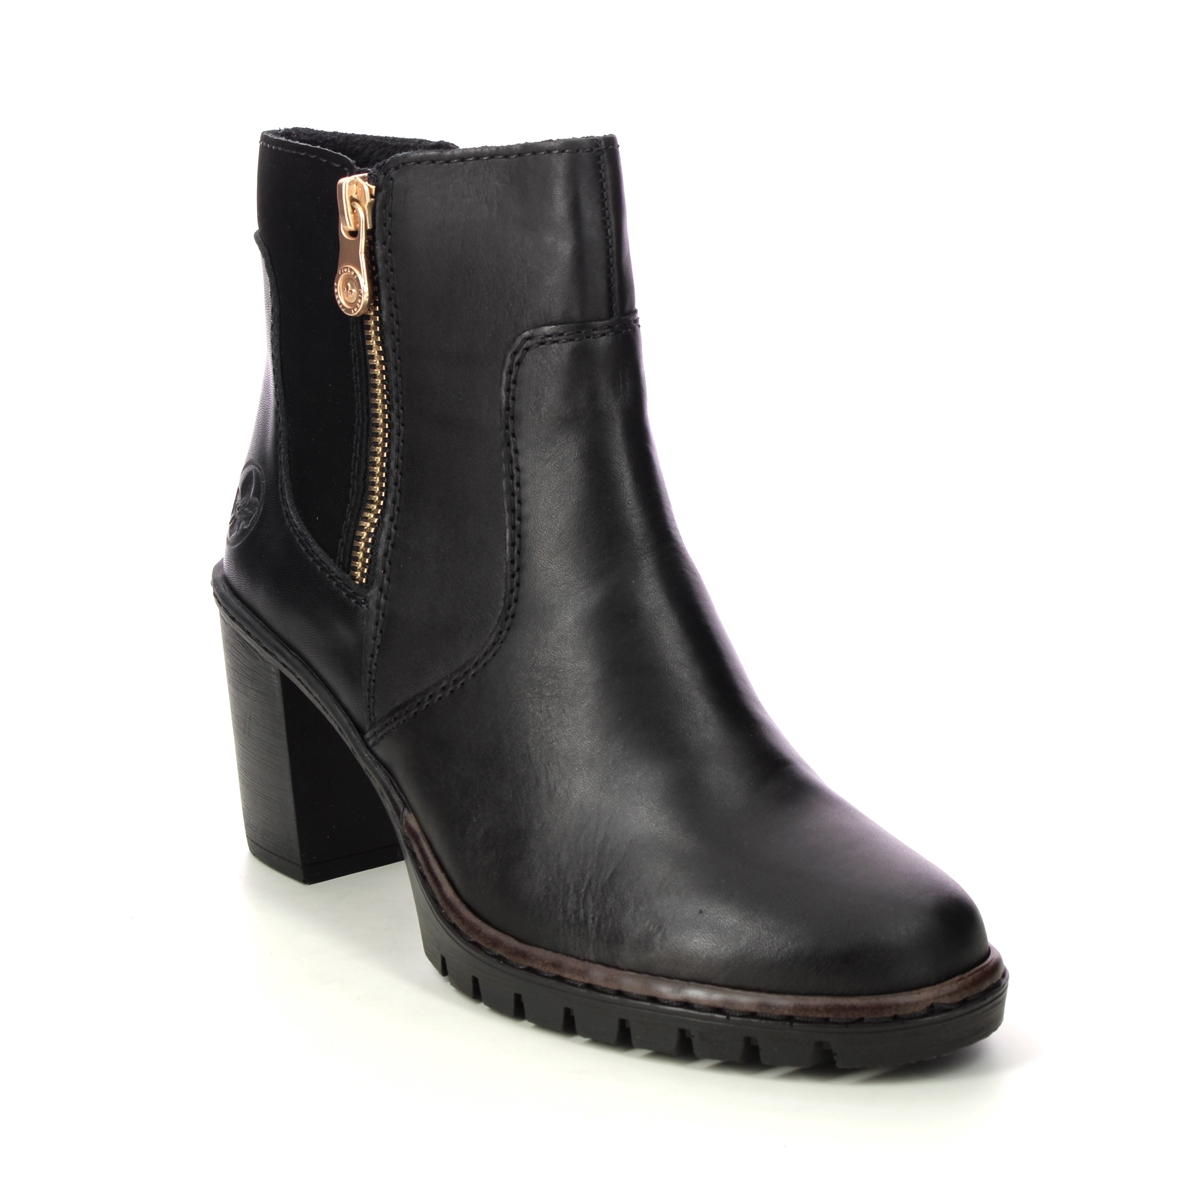 Rieker Y2557-00 Black leather Womens ankle boots in a Plain Leather in Size 40